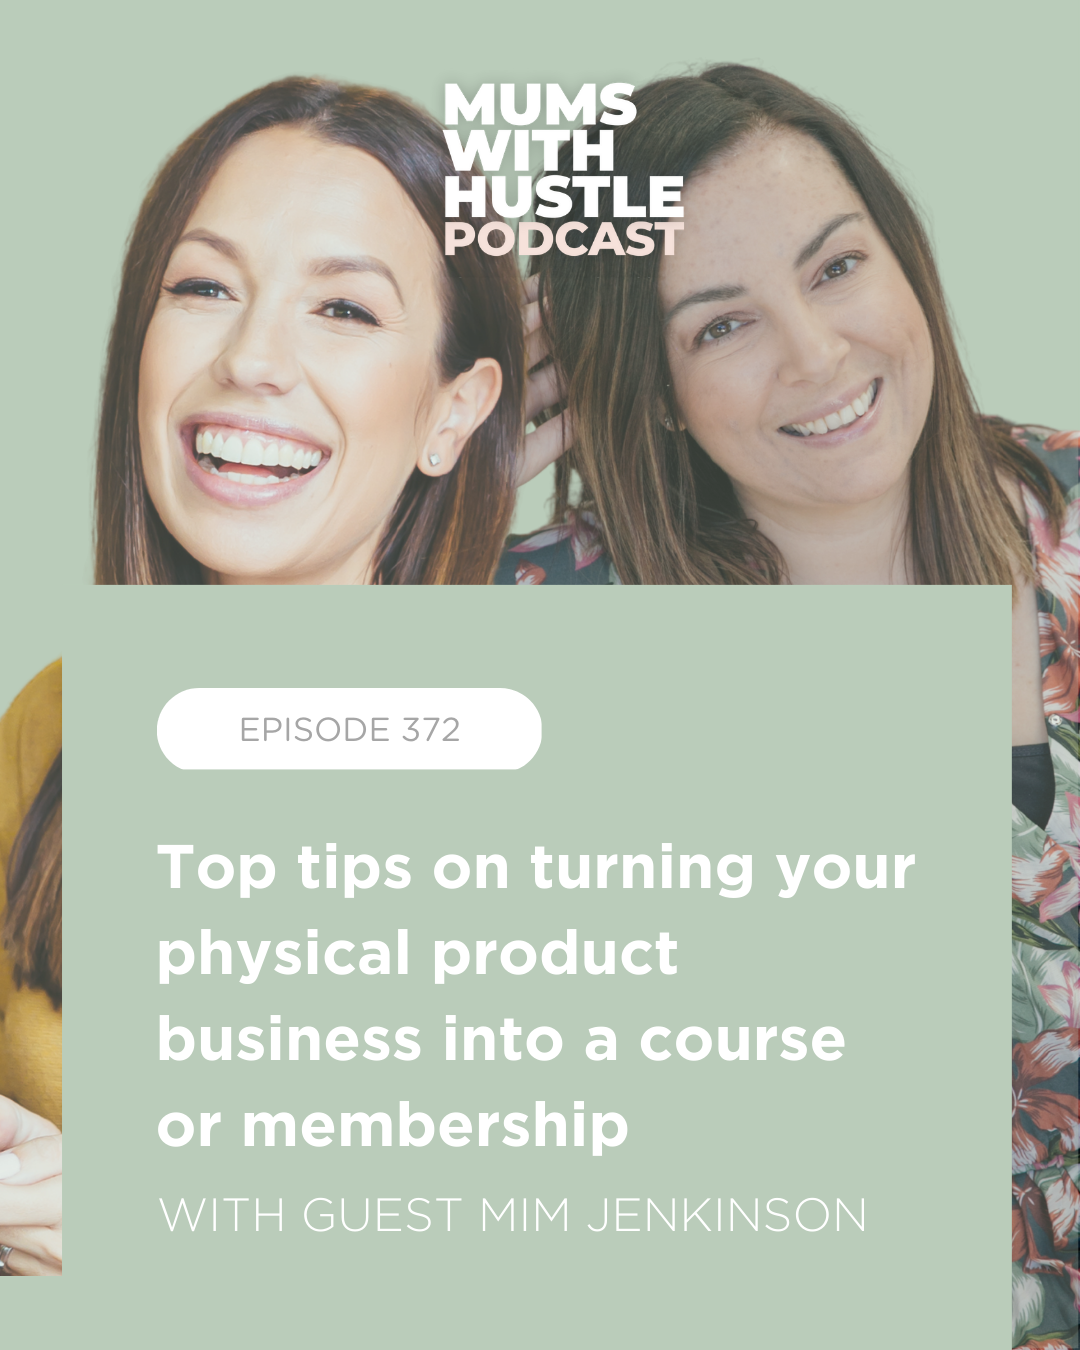 MWH 372 : Top tips on turning your physical product business into a course or membership with Mim Jenkinson